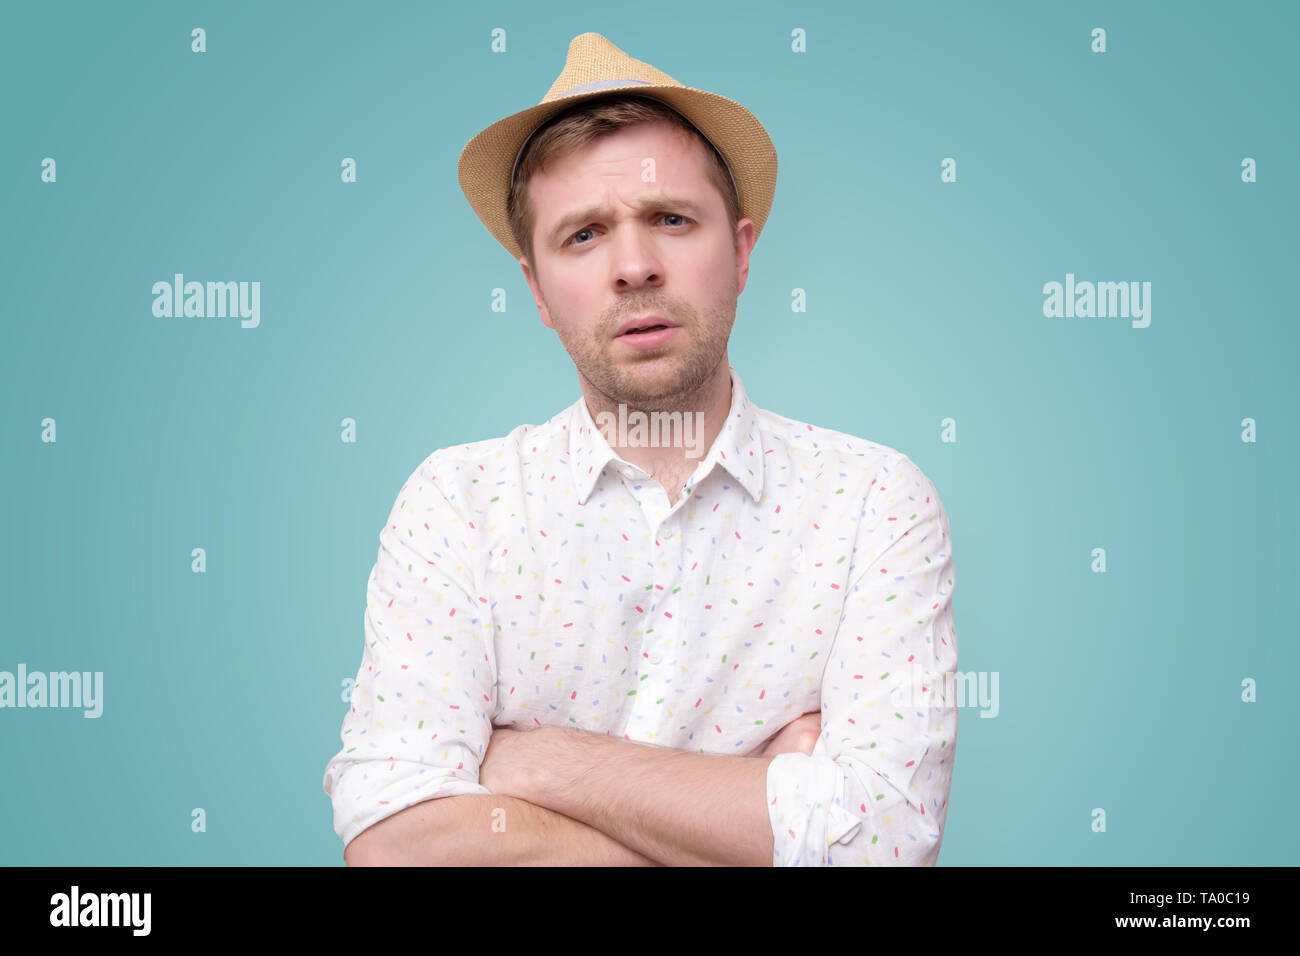 Young man in summer hat frowning showing disbelief or doubt. Stock Photo